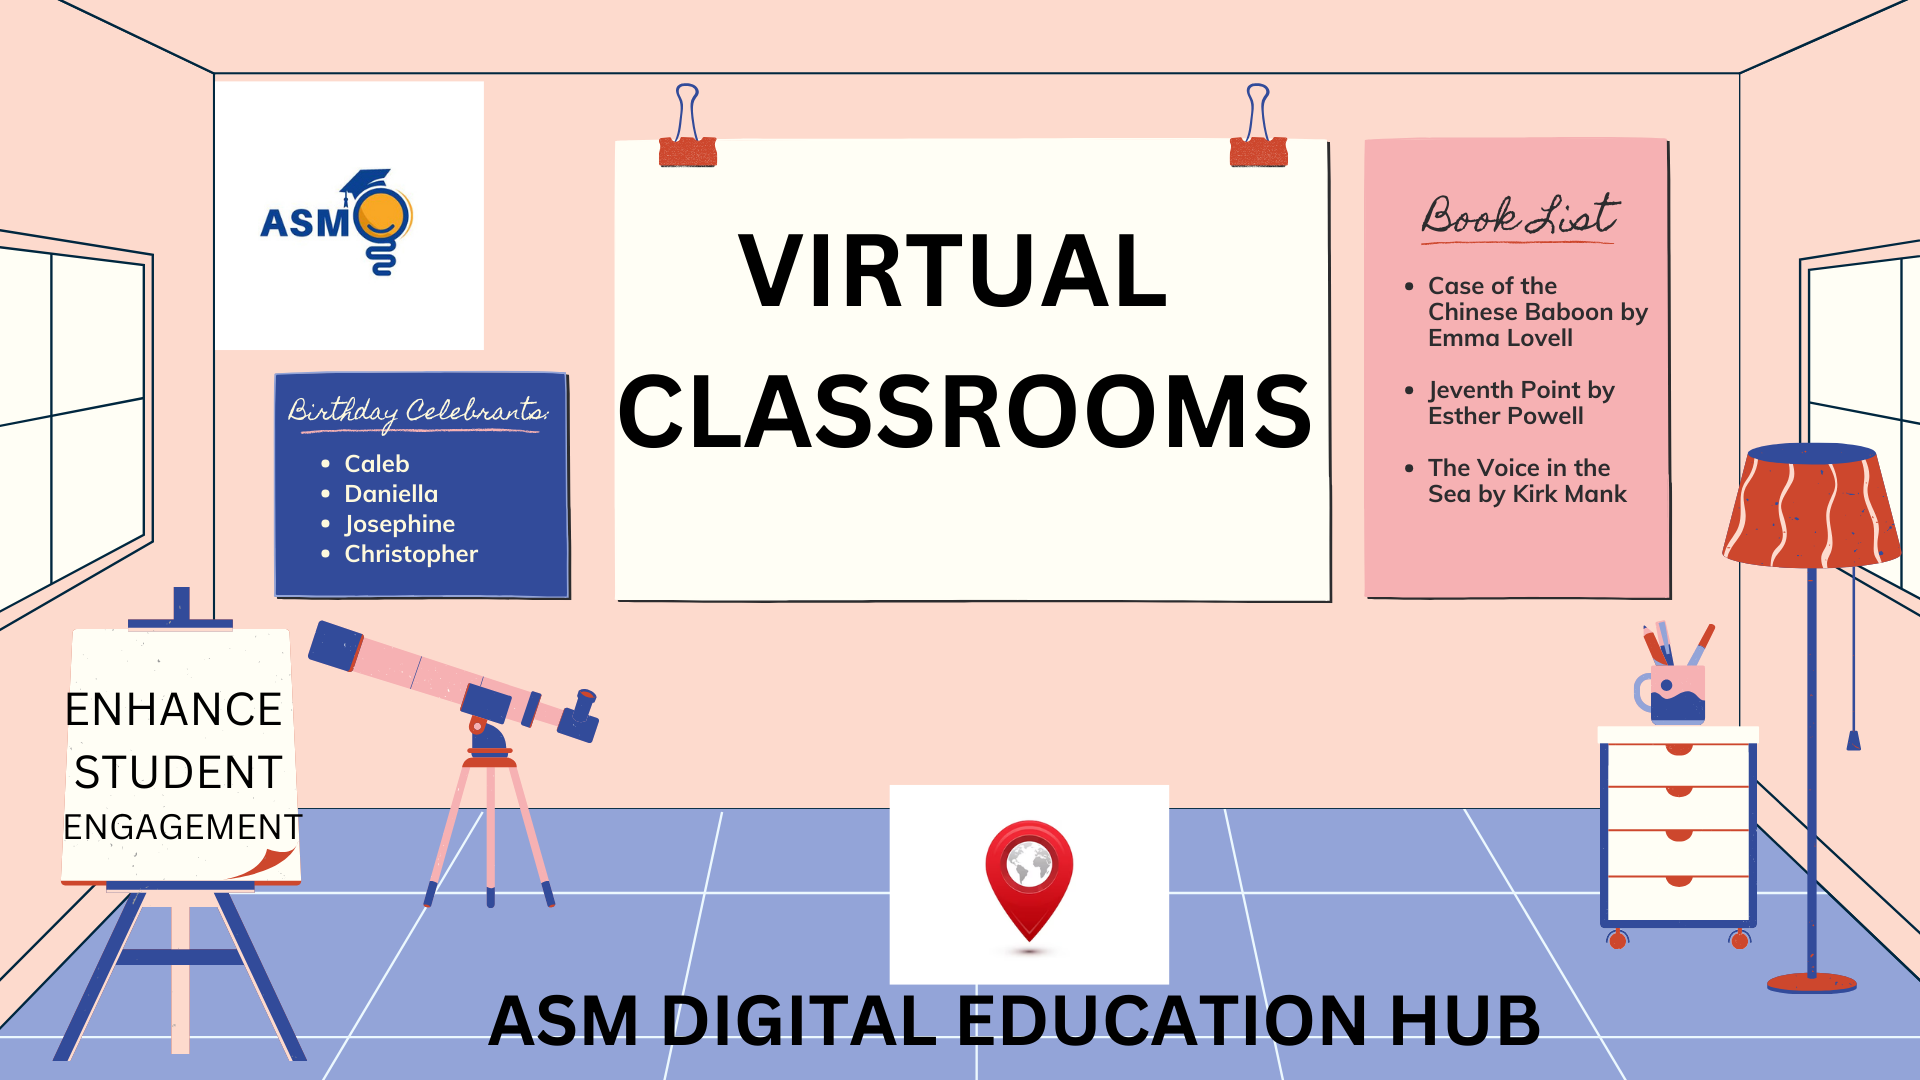 Interactive Virtual Platforms / Online Learning: Virtual Reality (VR) and Augmented Reality (AR): Virtual Guest Speakers and Experts (Online Learning): Gamified Learning Modules: AI-Powered Personalization: Virtual Labs and Simulations: Social Learning Platforms: